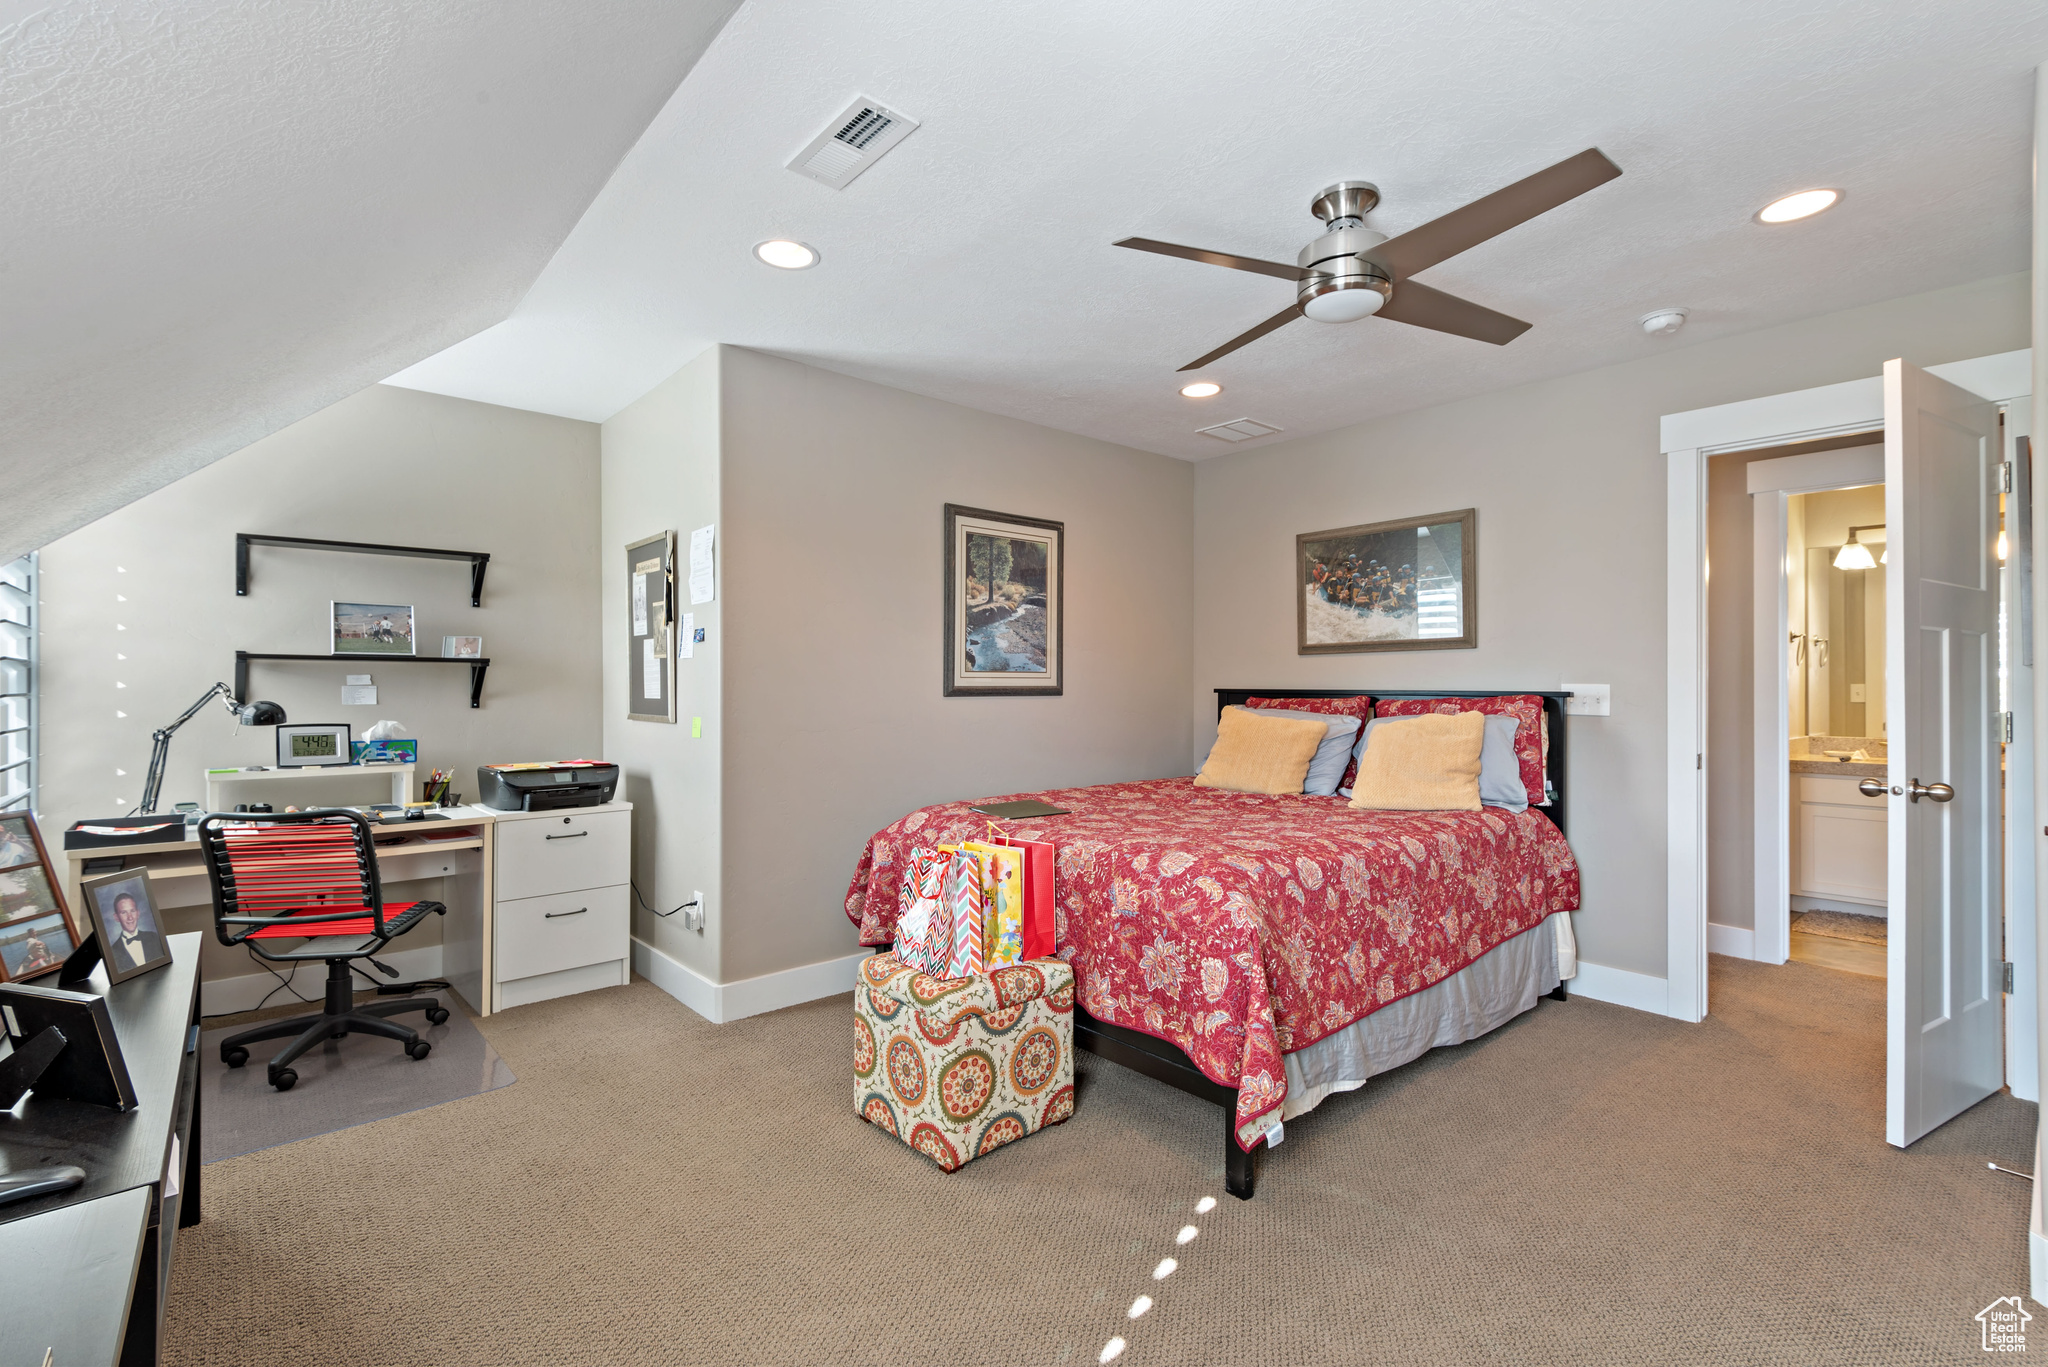 Carpeted bedroom featuring ceiling fan and ensuite bathroom